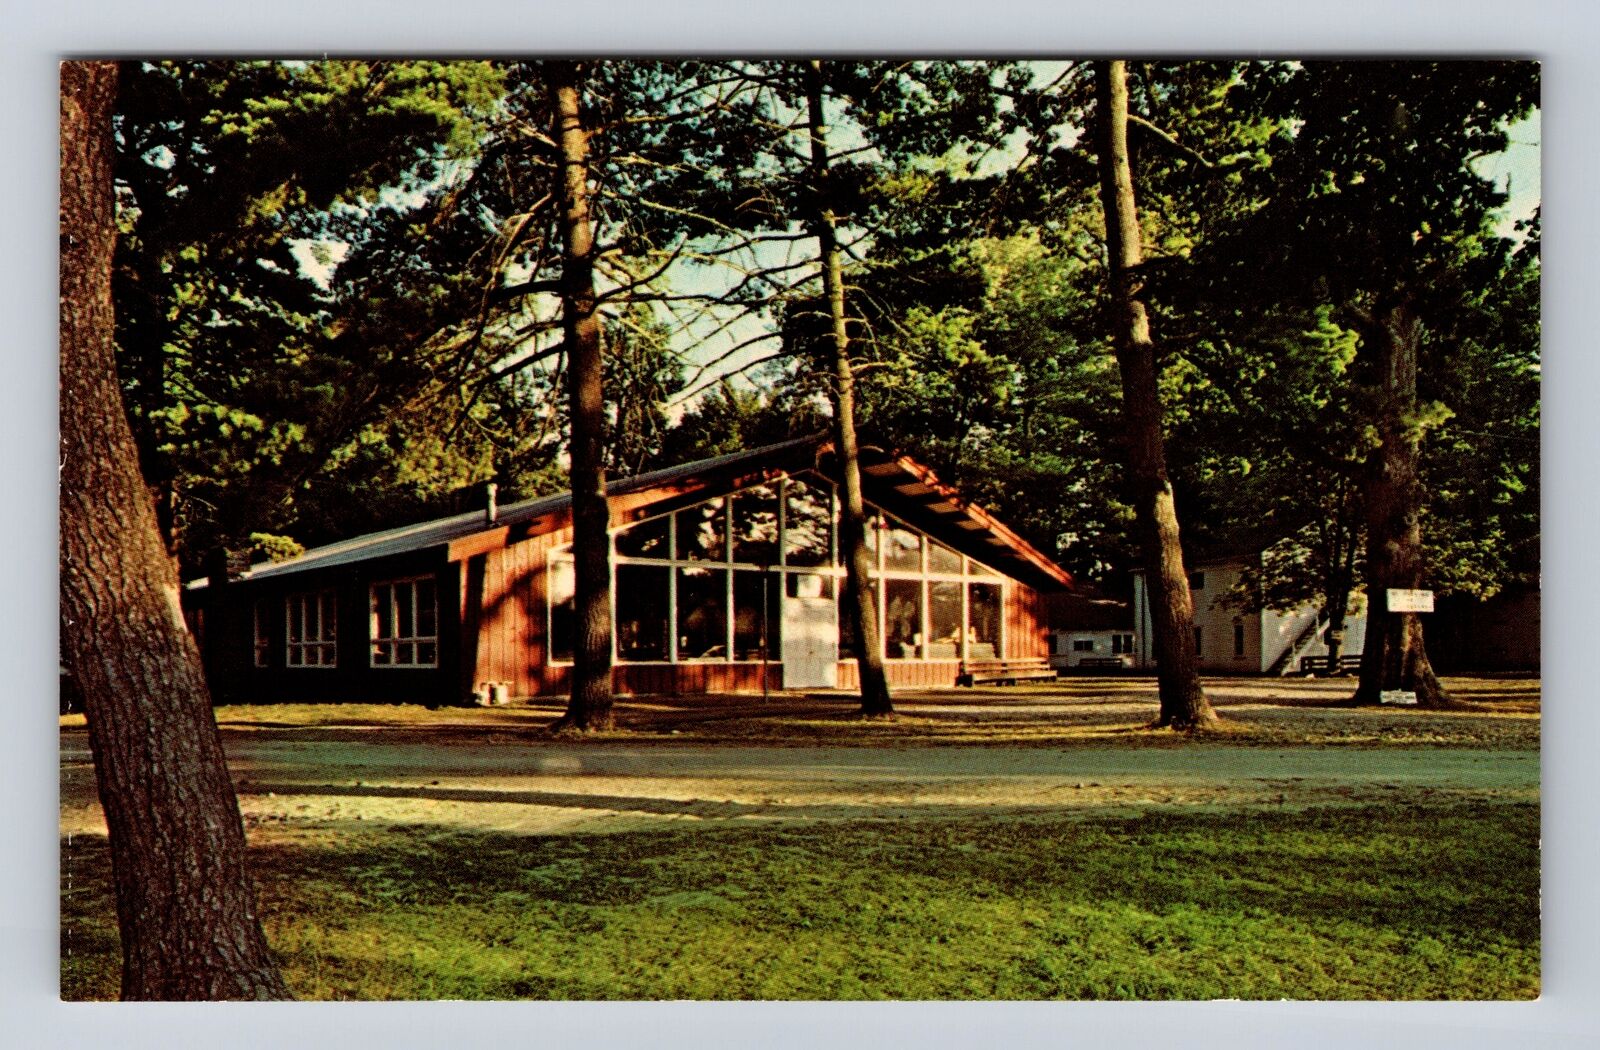 Houghton NY-New York, Houghton College, Campground, Dining Hall Vintage Postcard